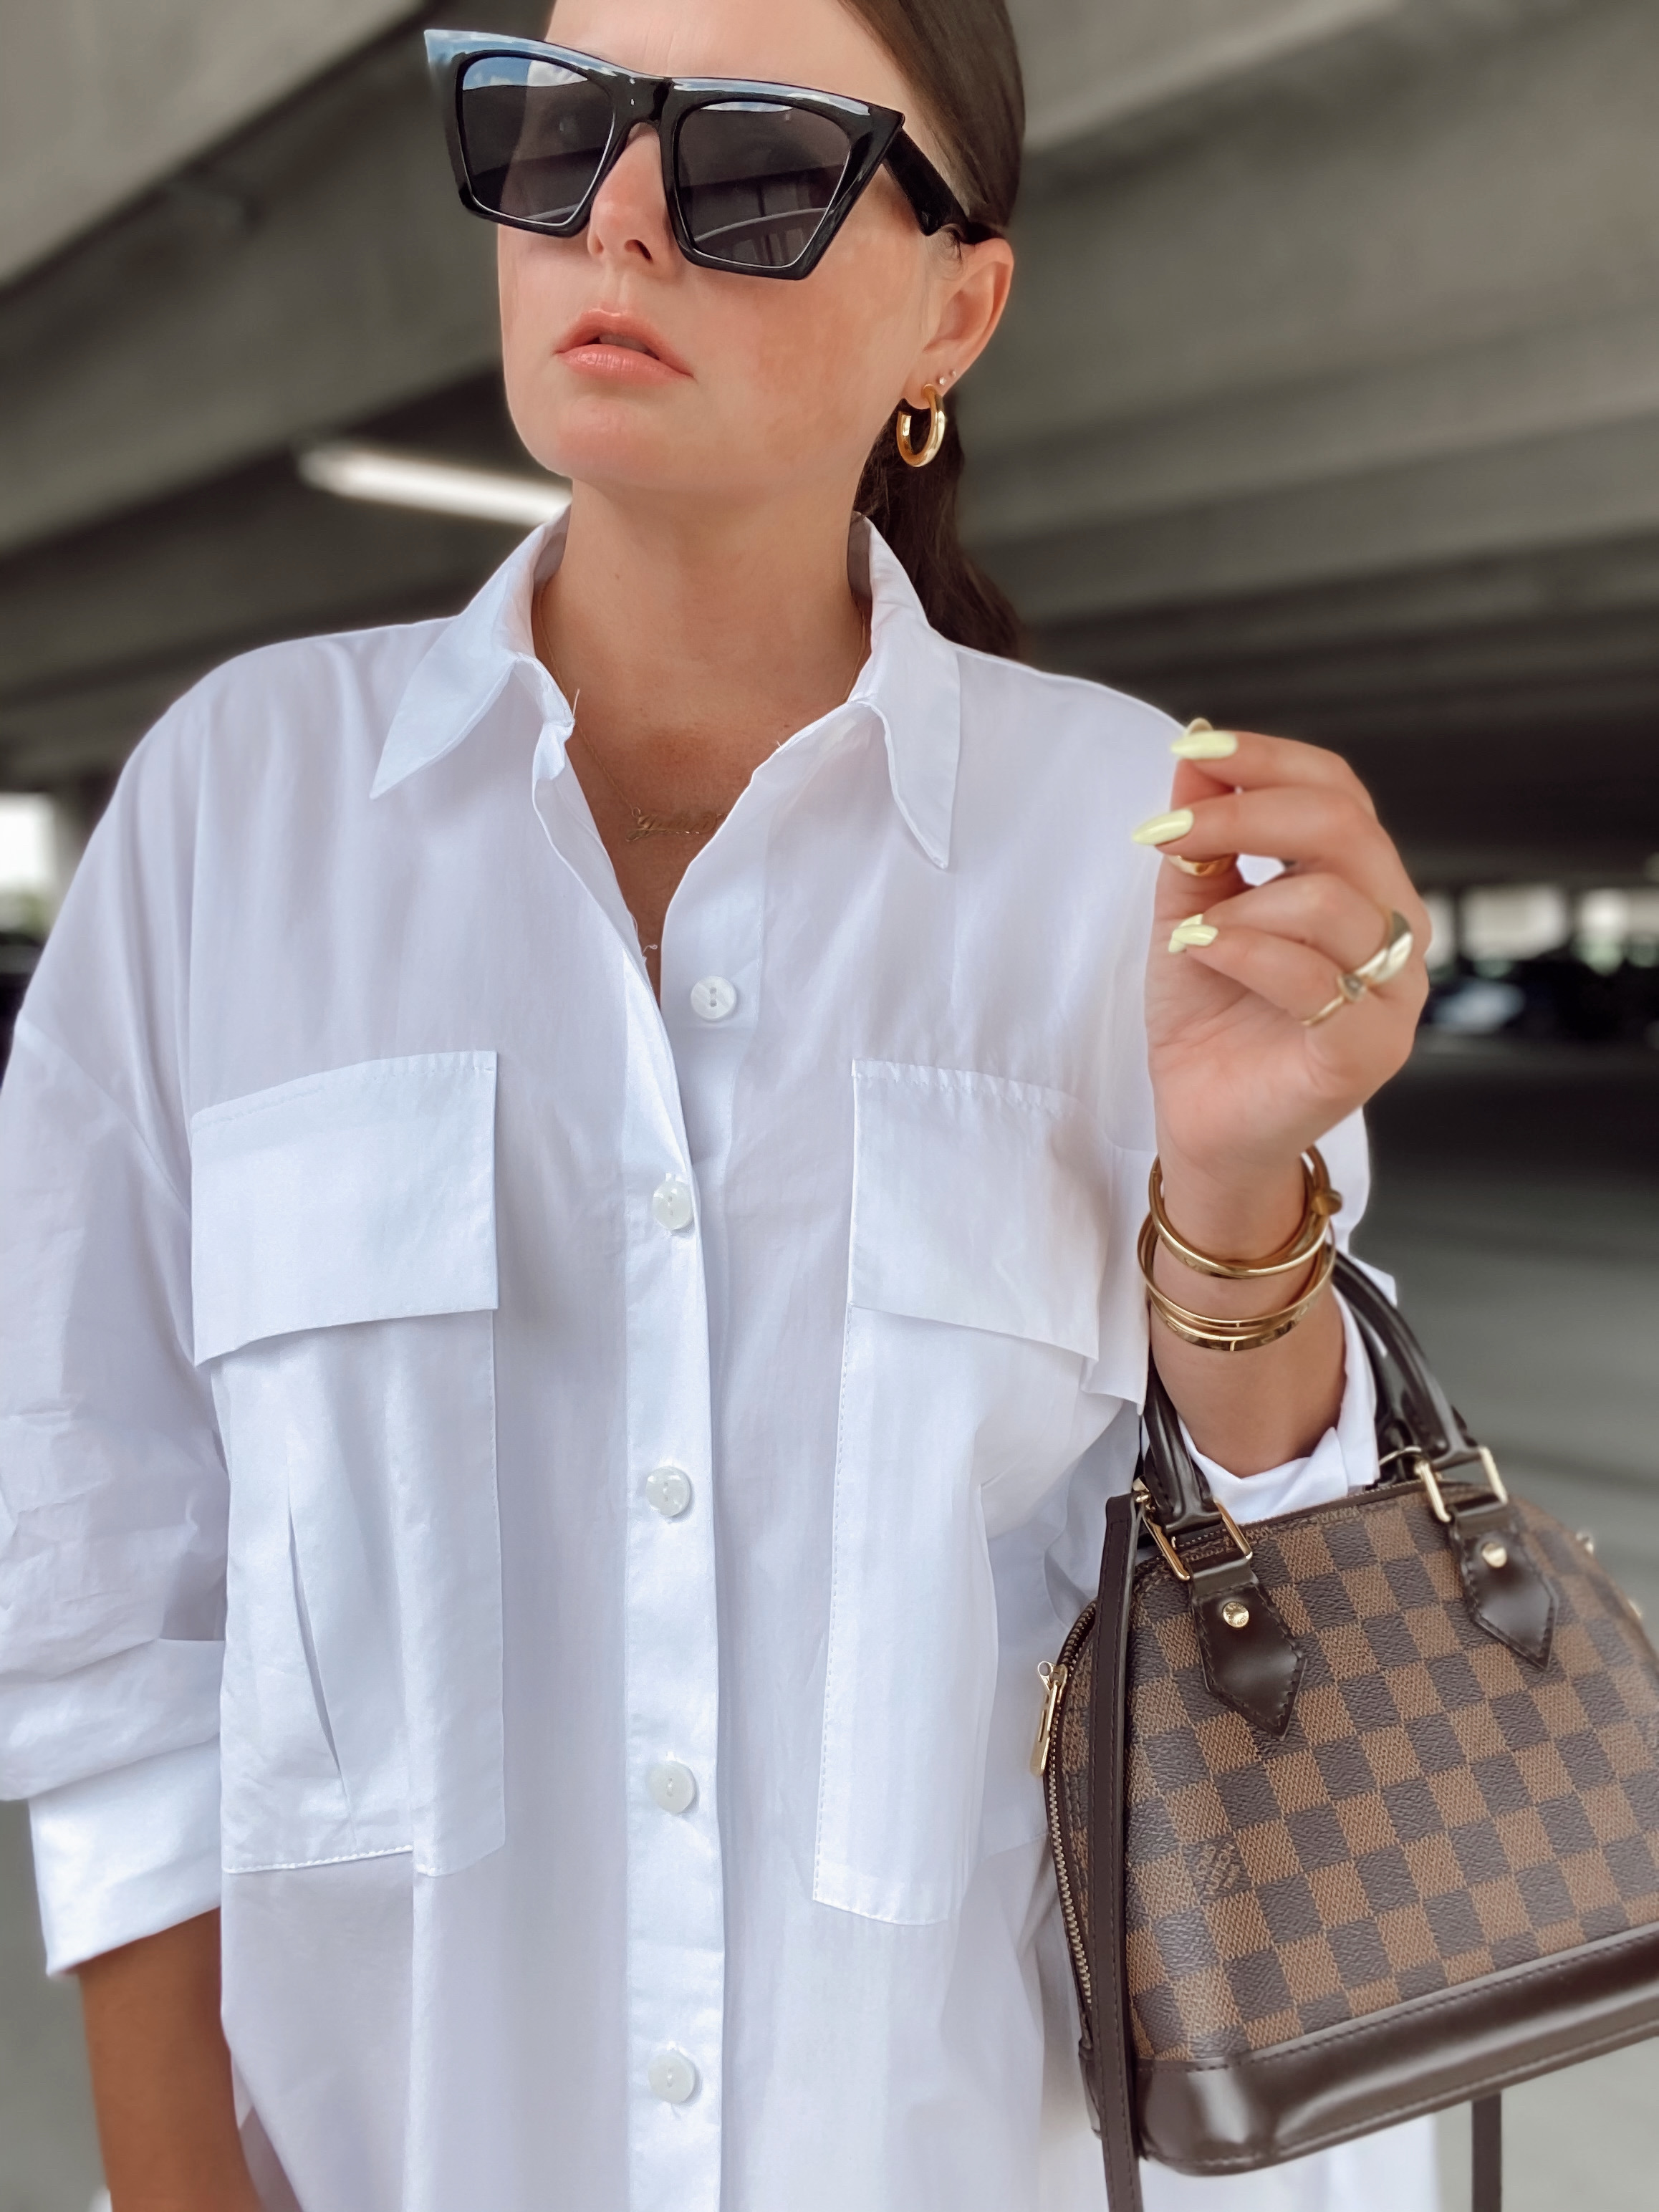 BEST ACCESSORIES TO ELEVATE YOUR LOOK 2020: http://www.juliamarieb.com/2020/08/16/best-accessories-to-elevate-your-look-2020/   |    @julia.marie.b